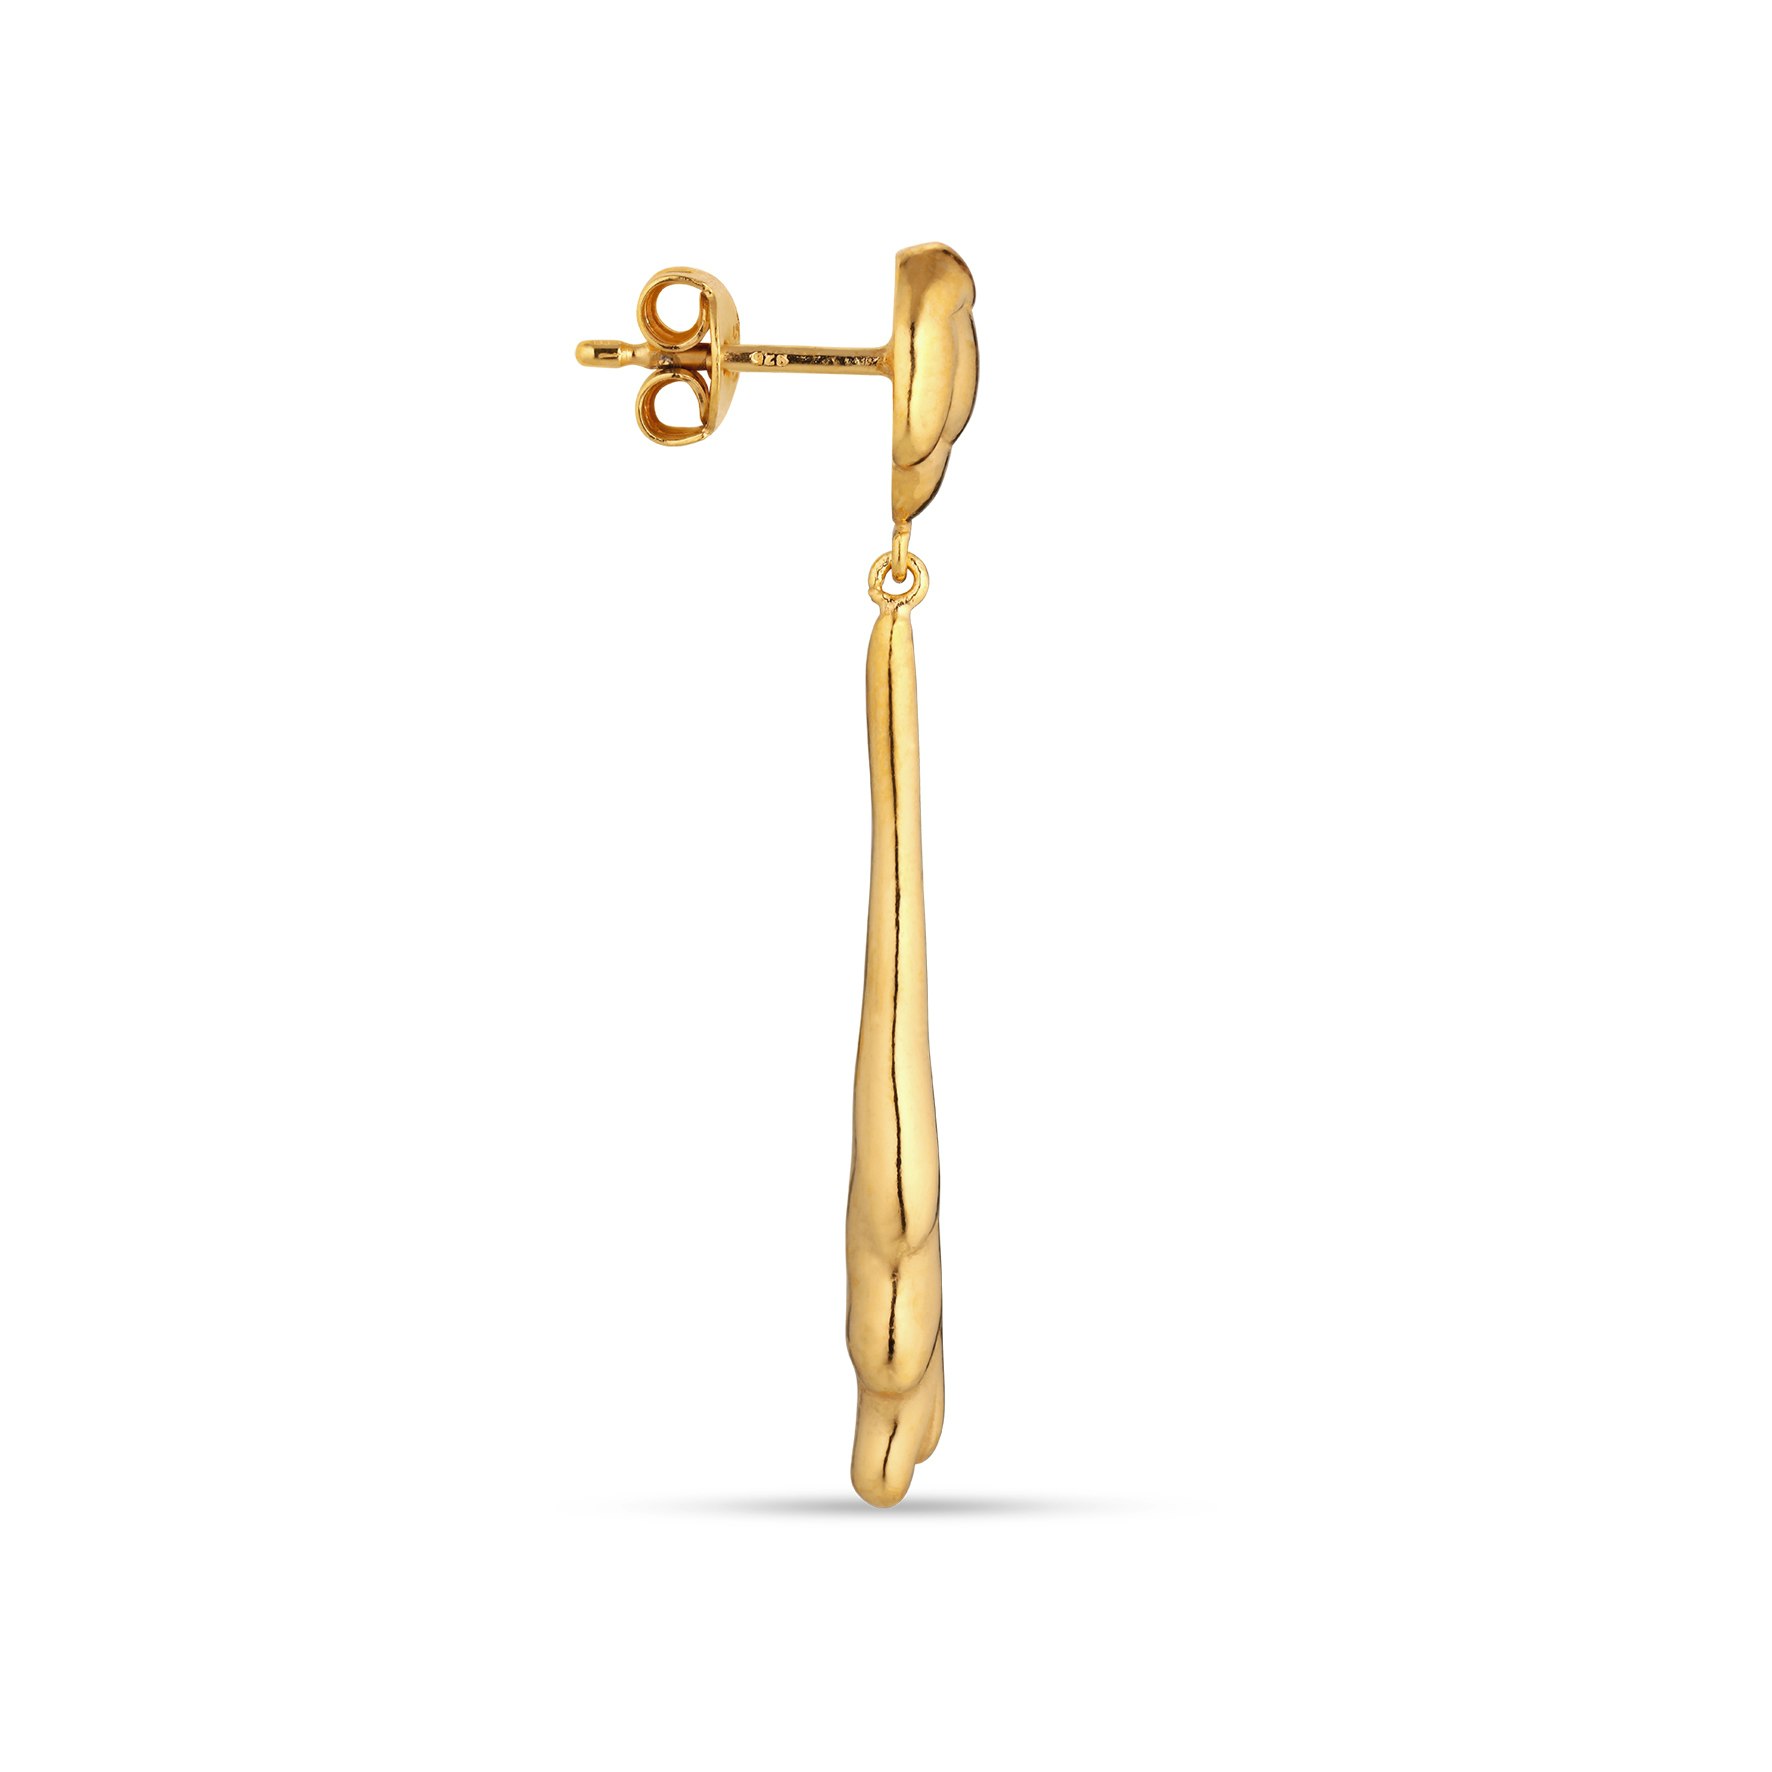 Drippy Earring With Drop Pendant from Jane Kønig in Goldplated-Silver Sterling 925